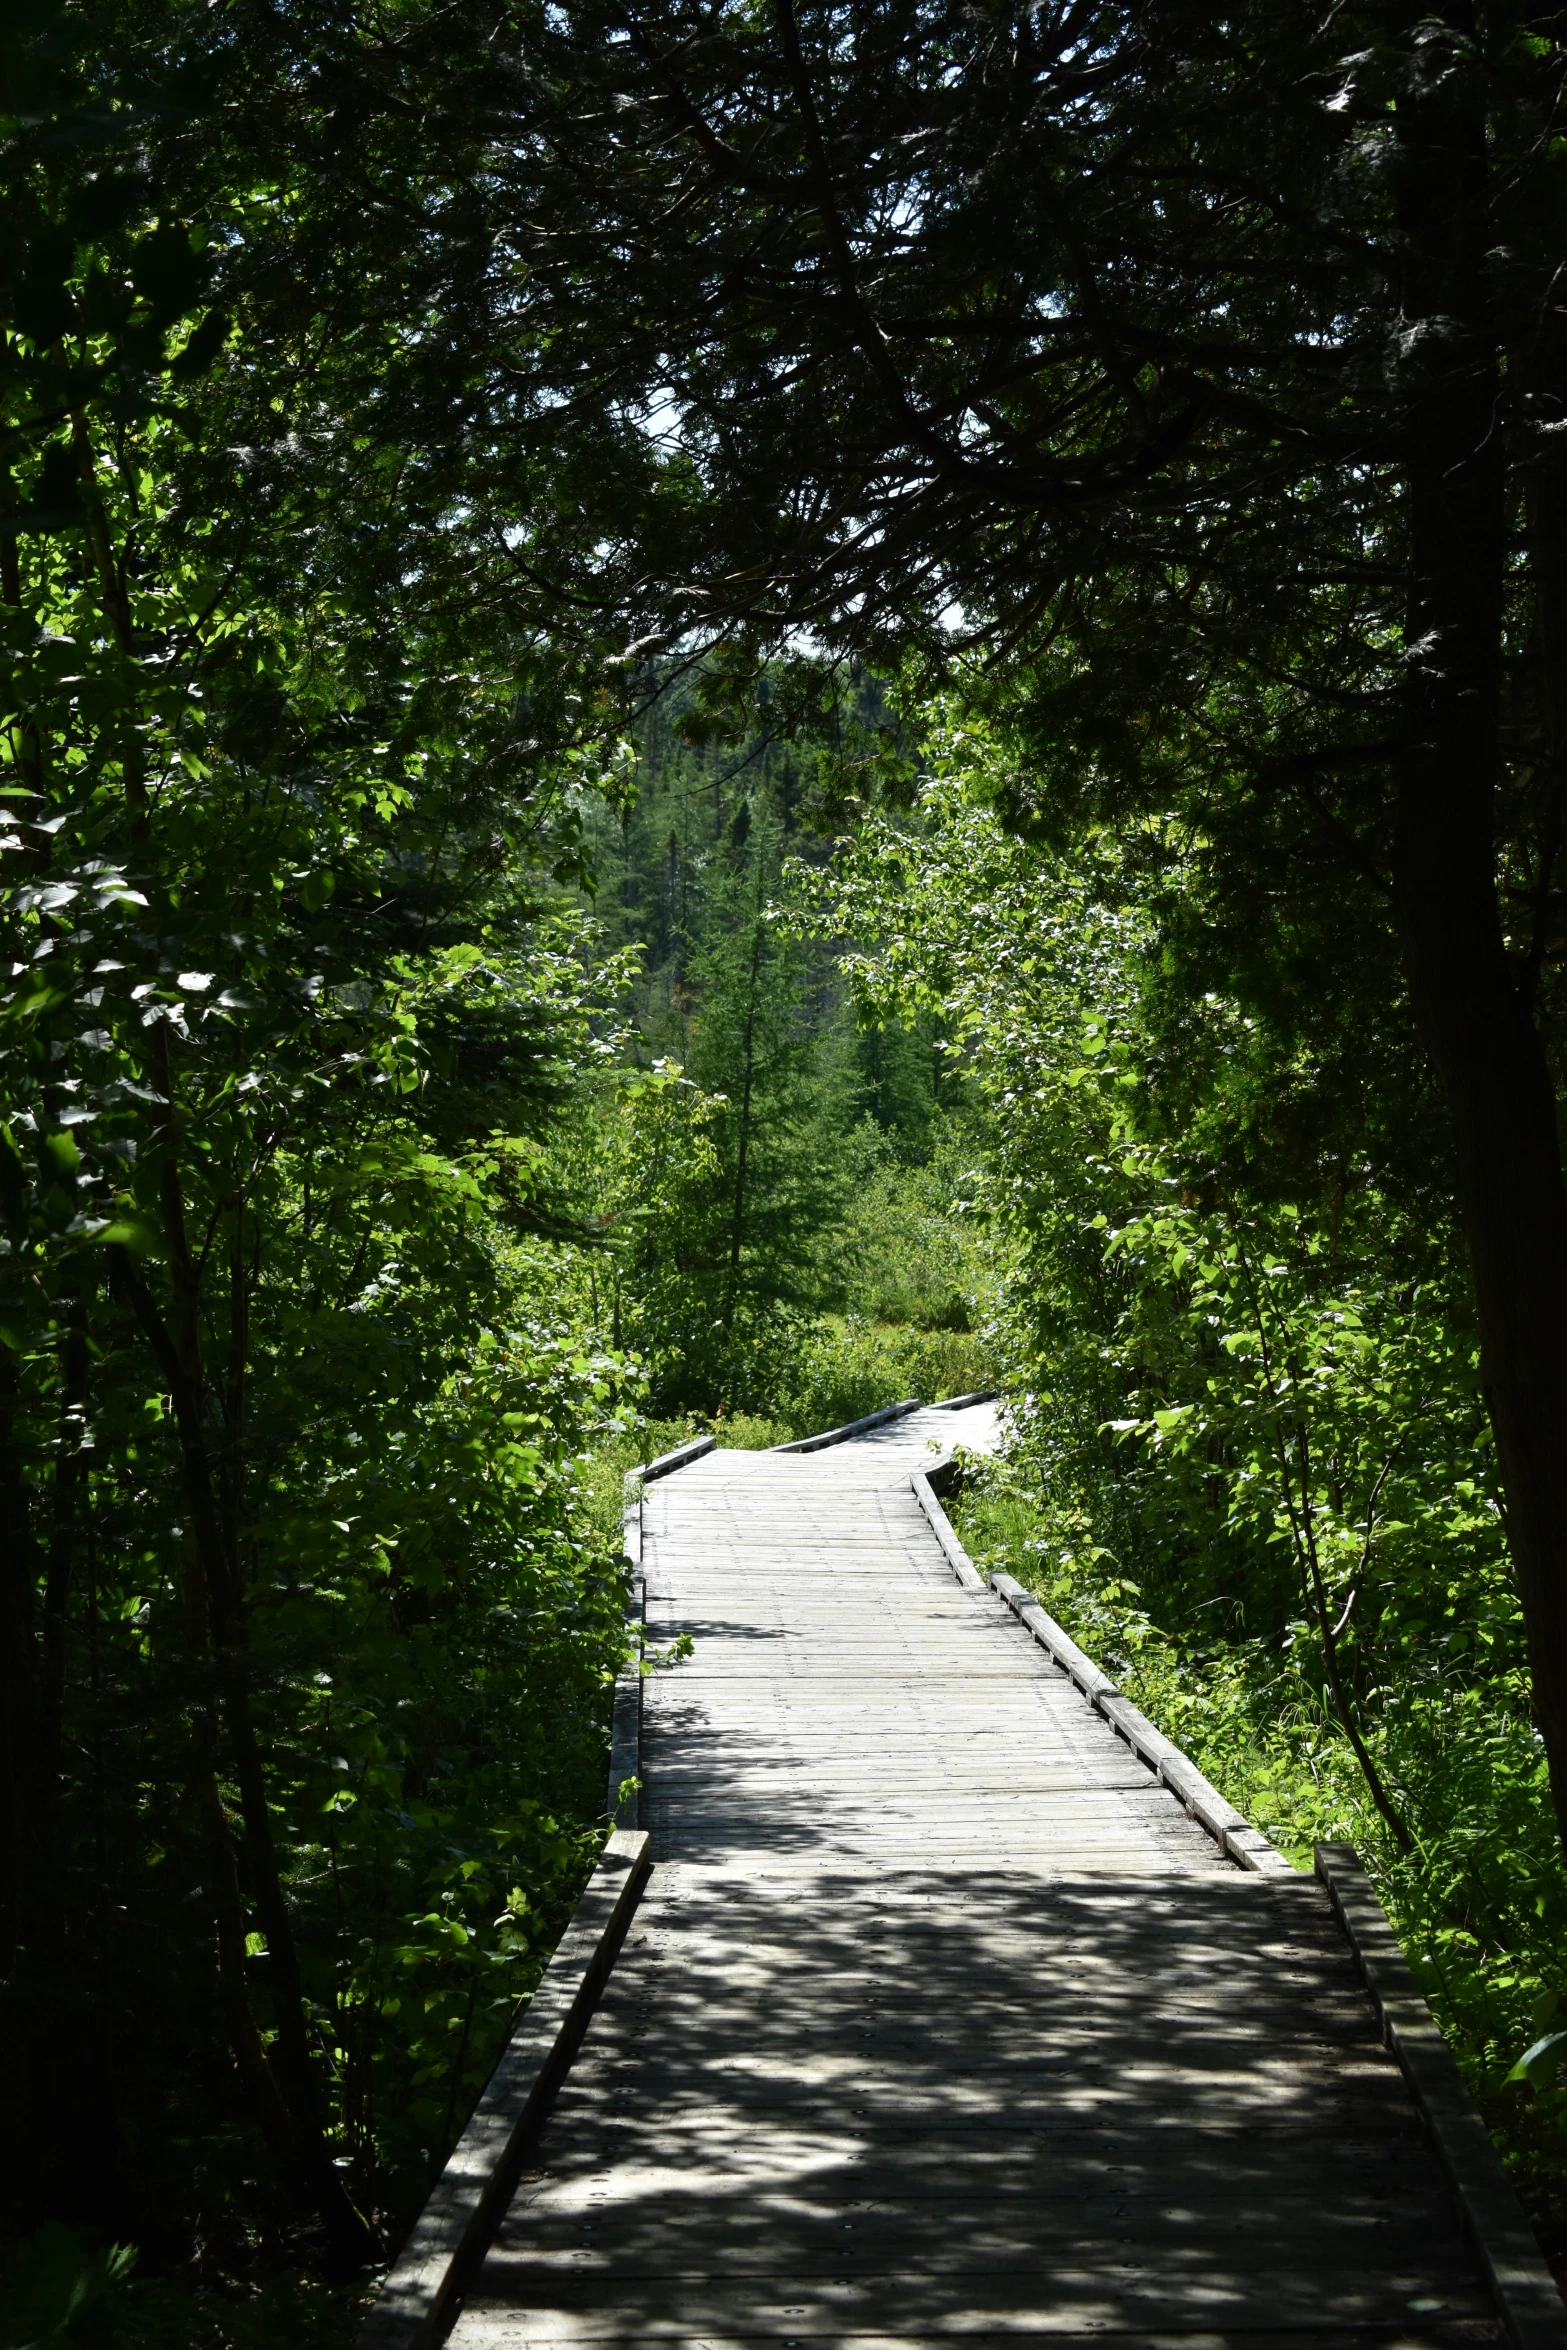 a very long, empty wooden path going through some forest